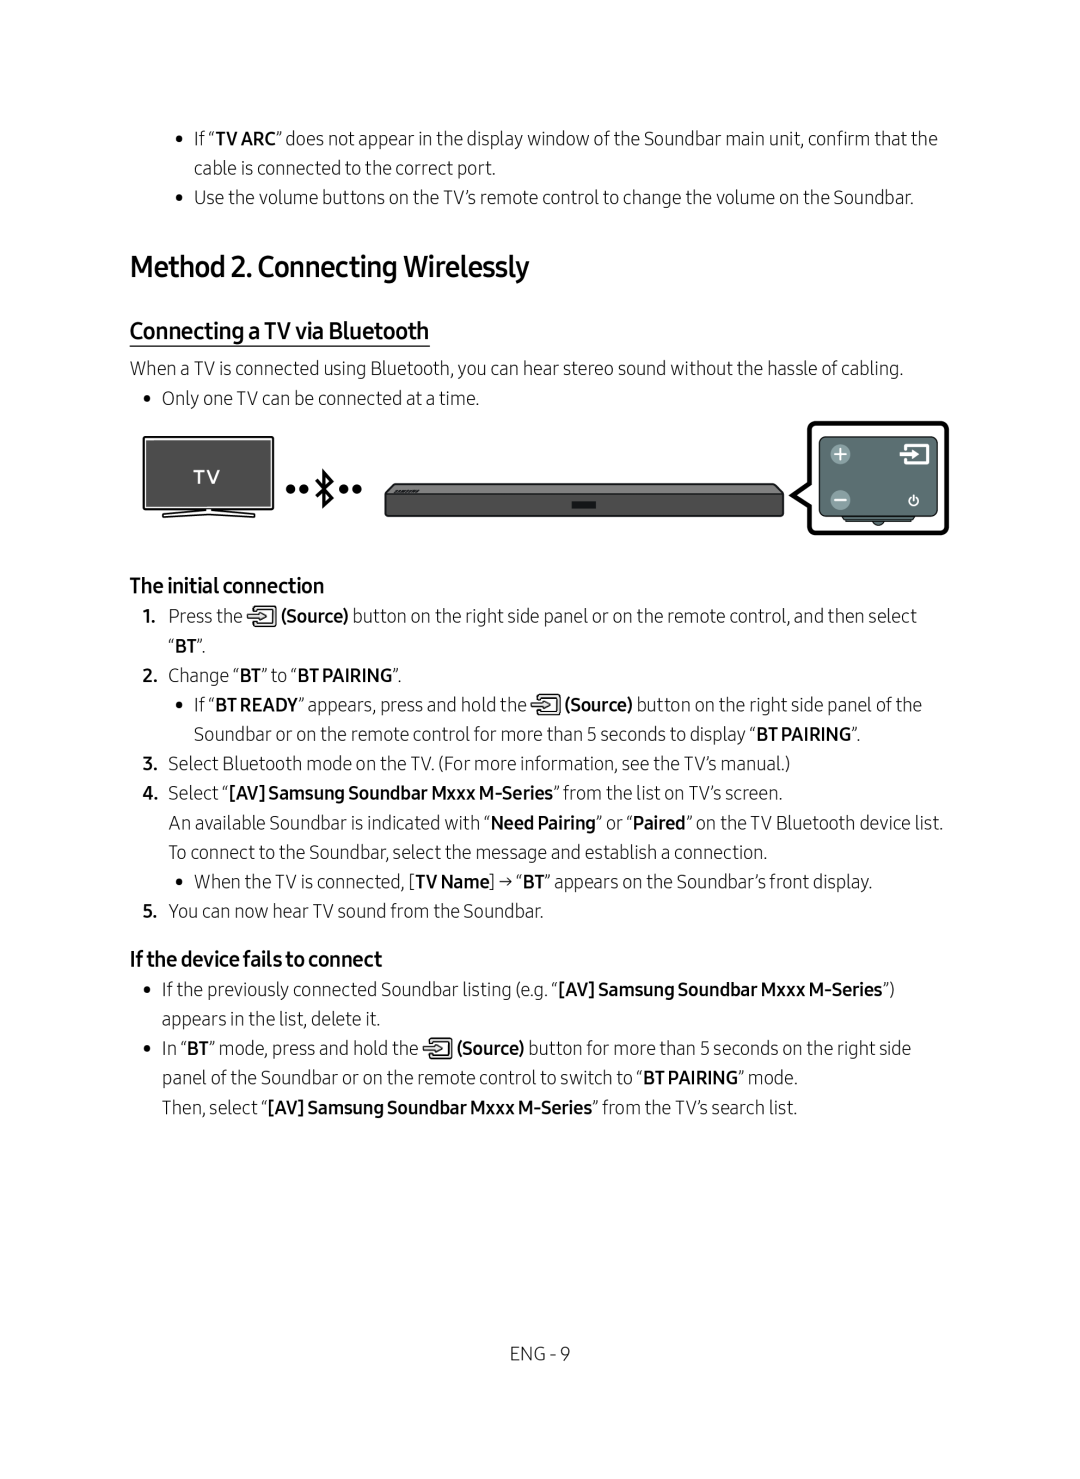 Samsung HW-M450/ZG, HW-M450/EN manual Method 2. Connecting Wirelessly, Connecting a TV via Bluetooth, The initial connection 